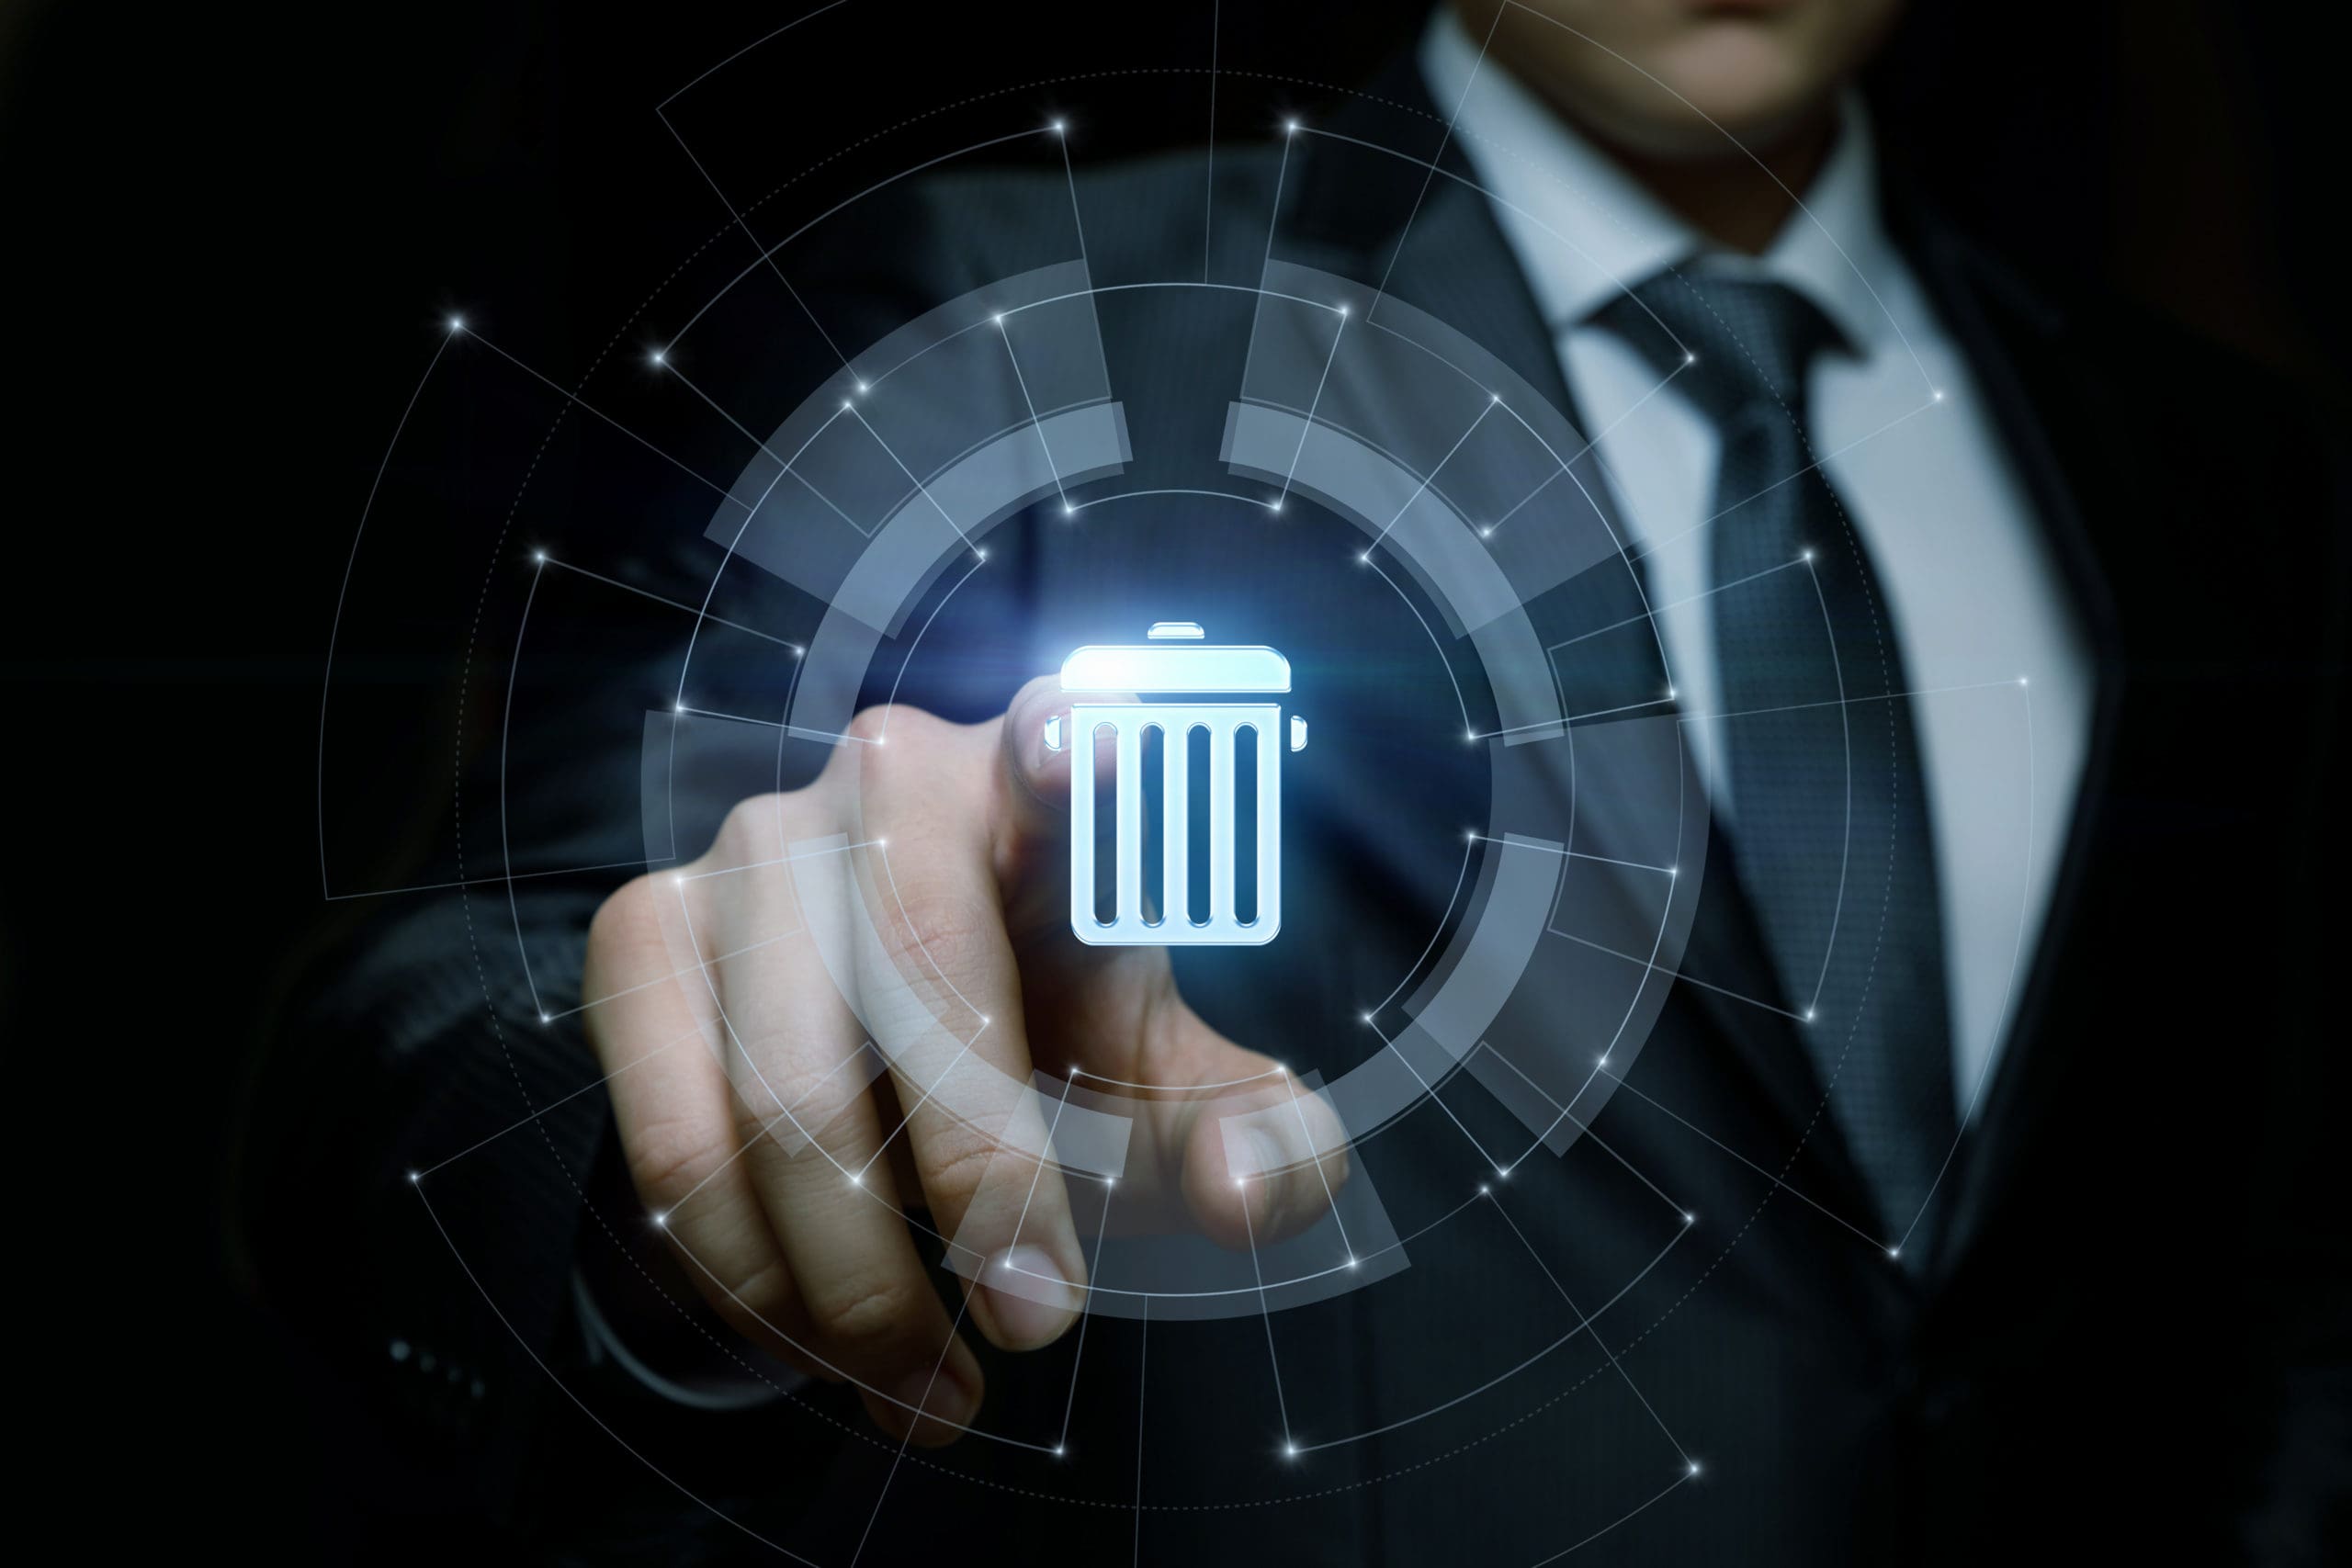 A man in a suit is pointing at a trash can icon.